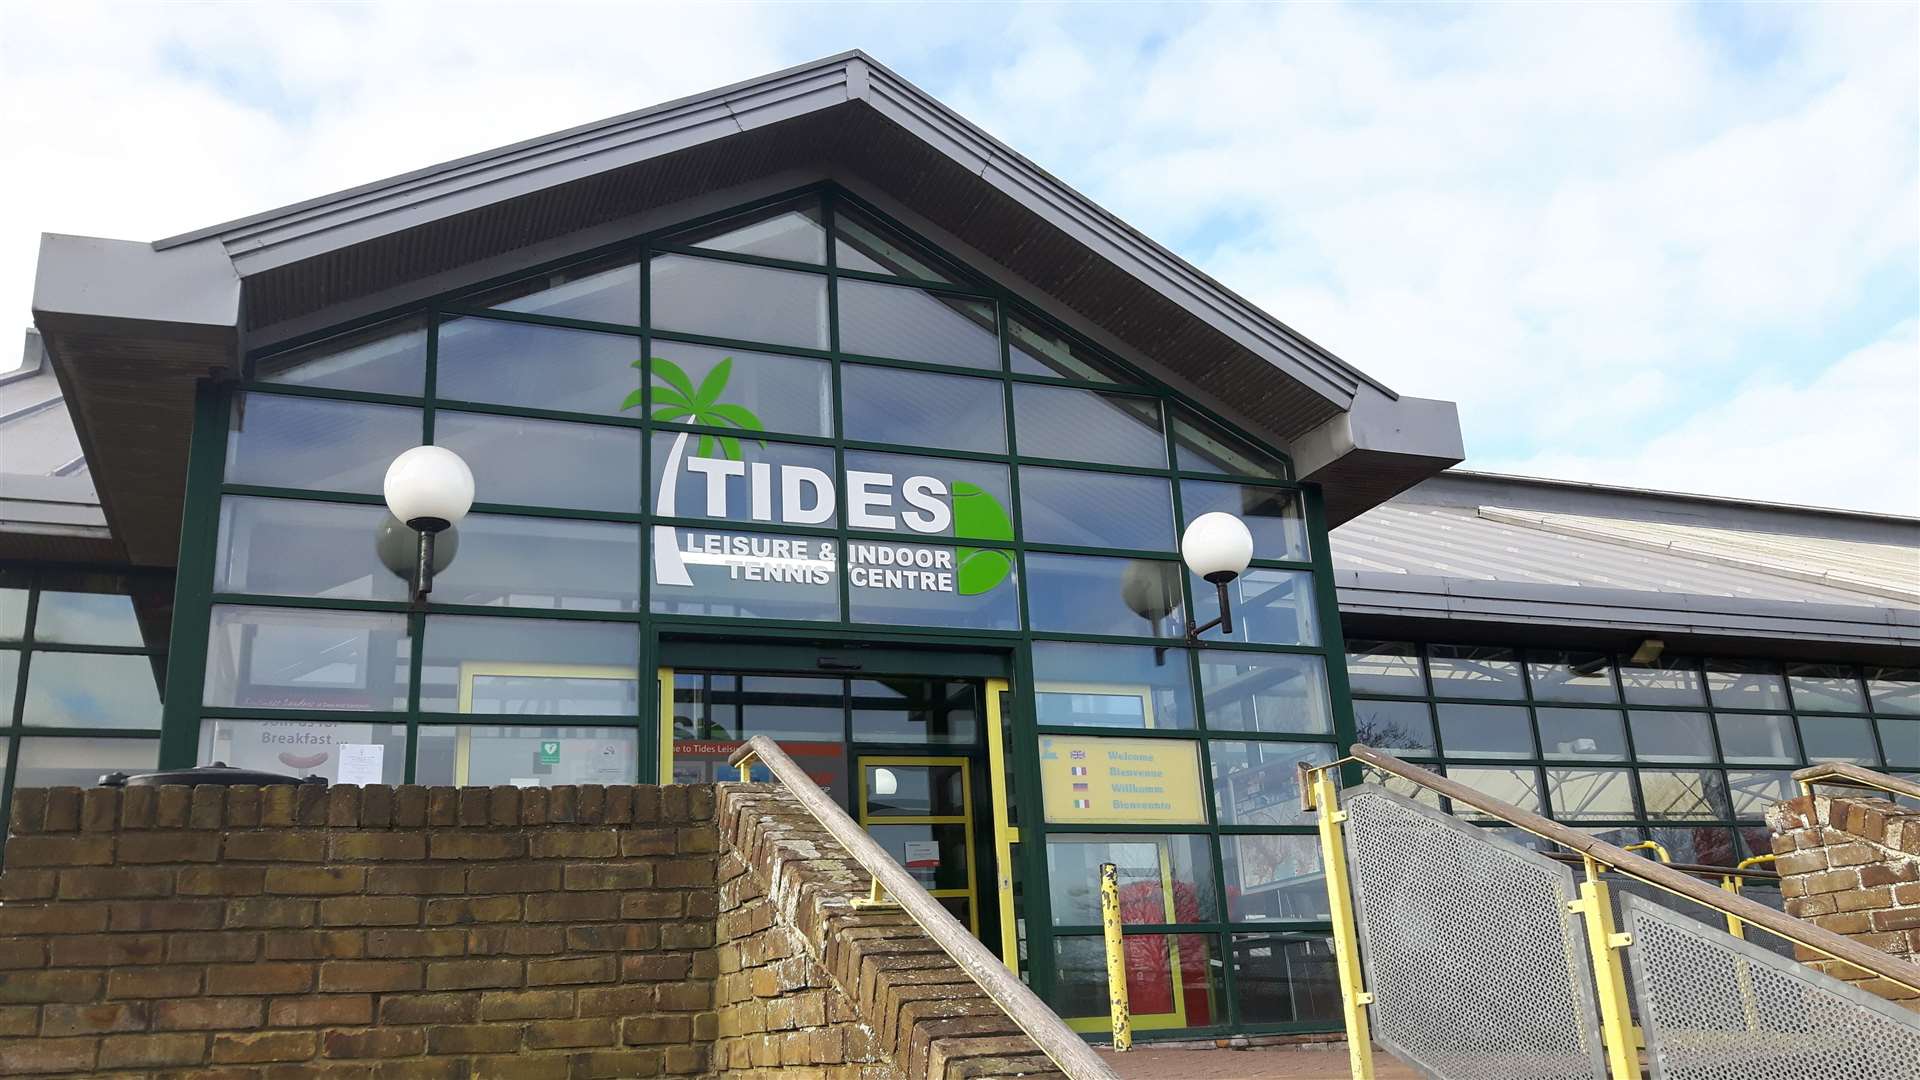 The council budget for 2022/23 will also cover work at Tides Leisure Centre